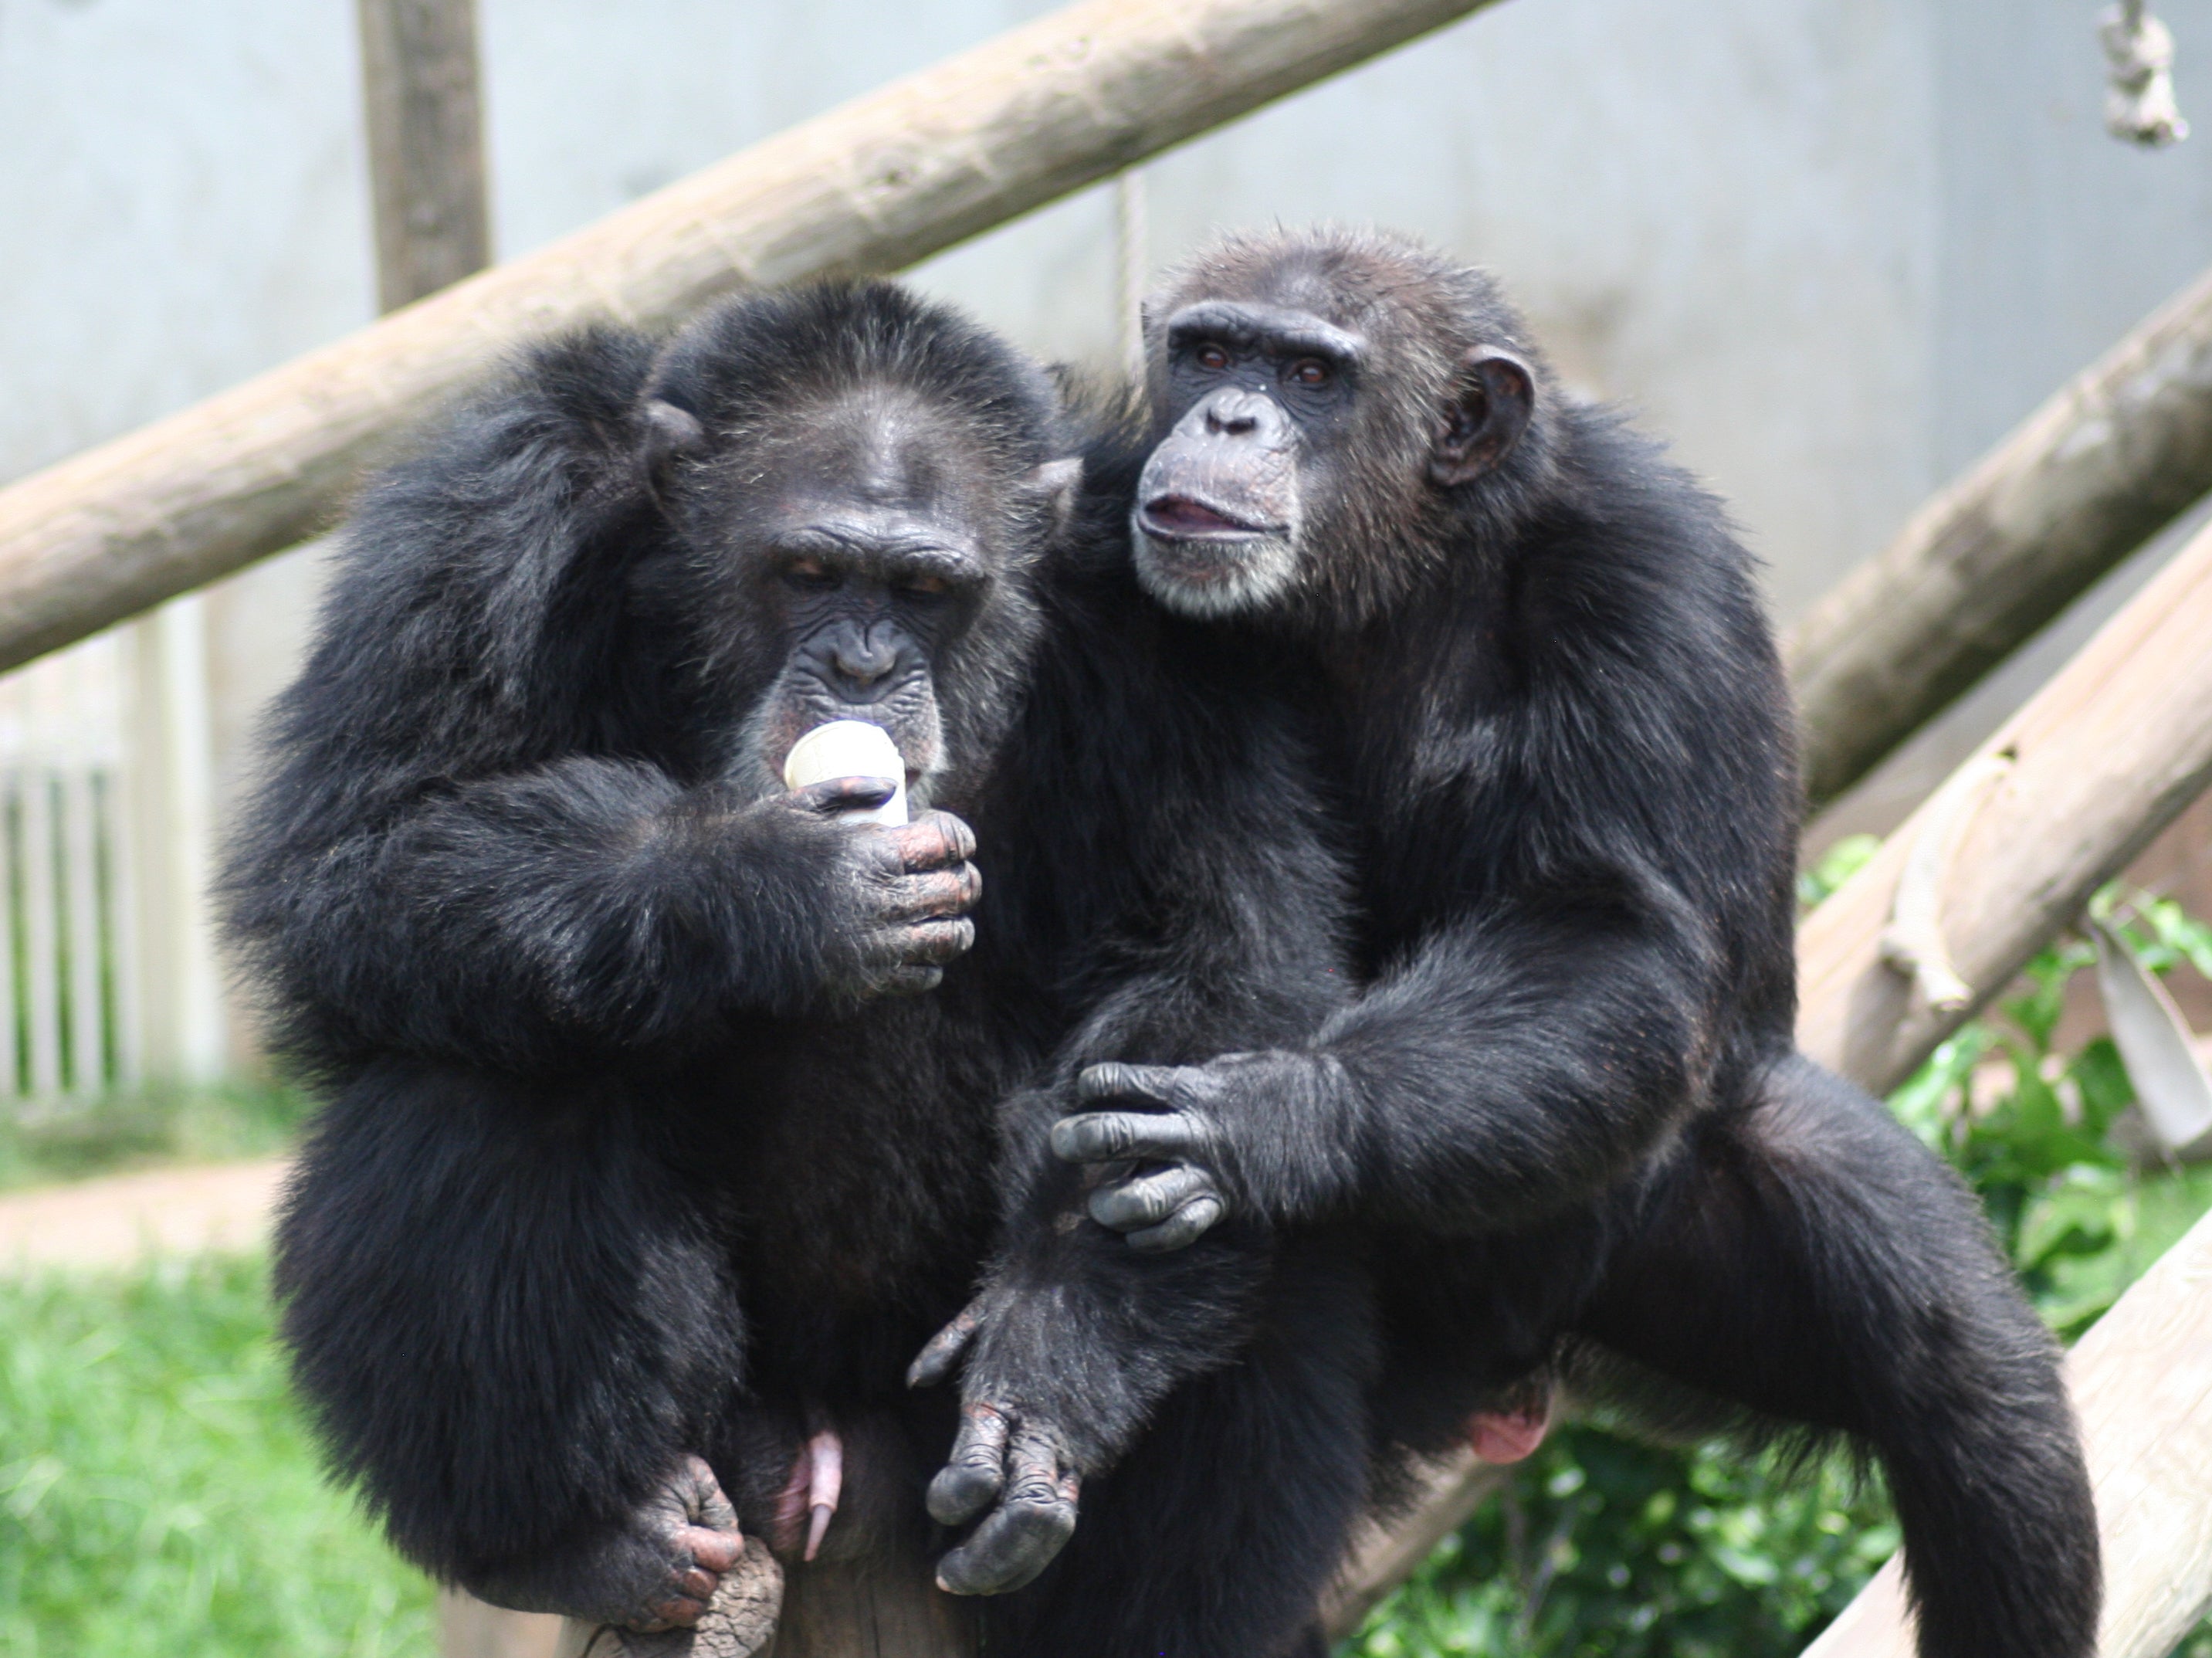 Chimpanzees Tina and Martin, who were studied at the National Centre for Chimpanzee Care in Texas